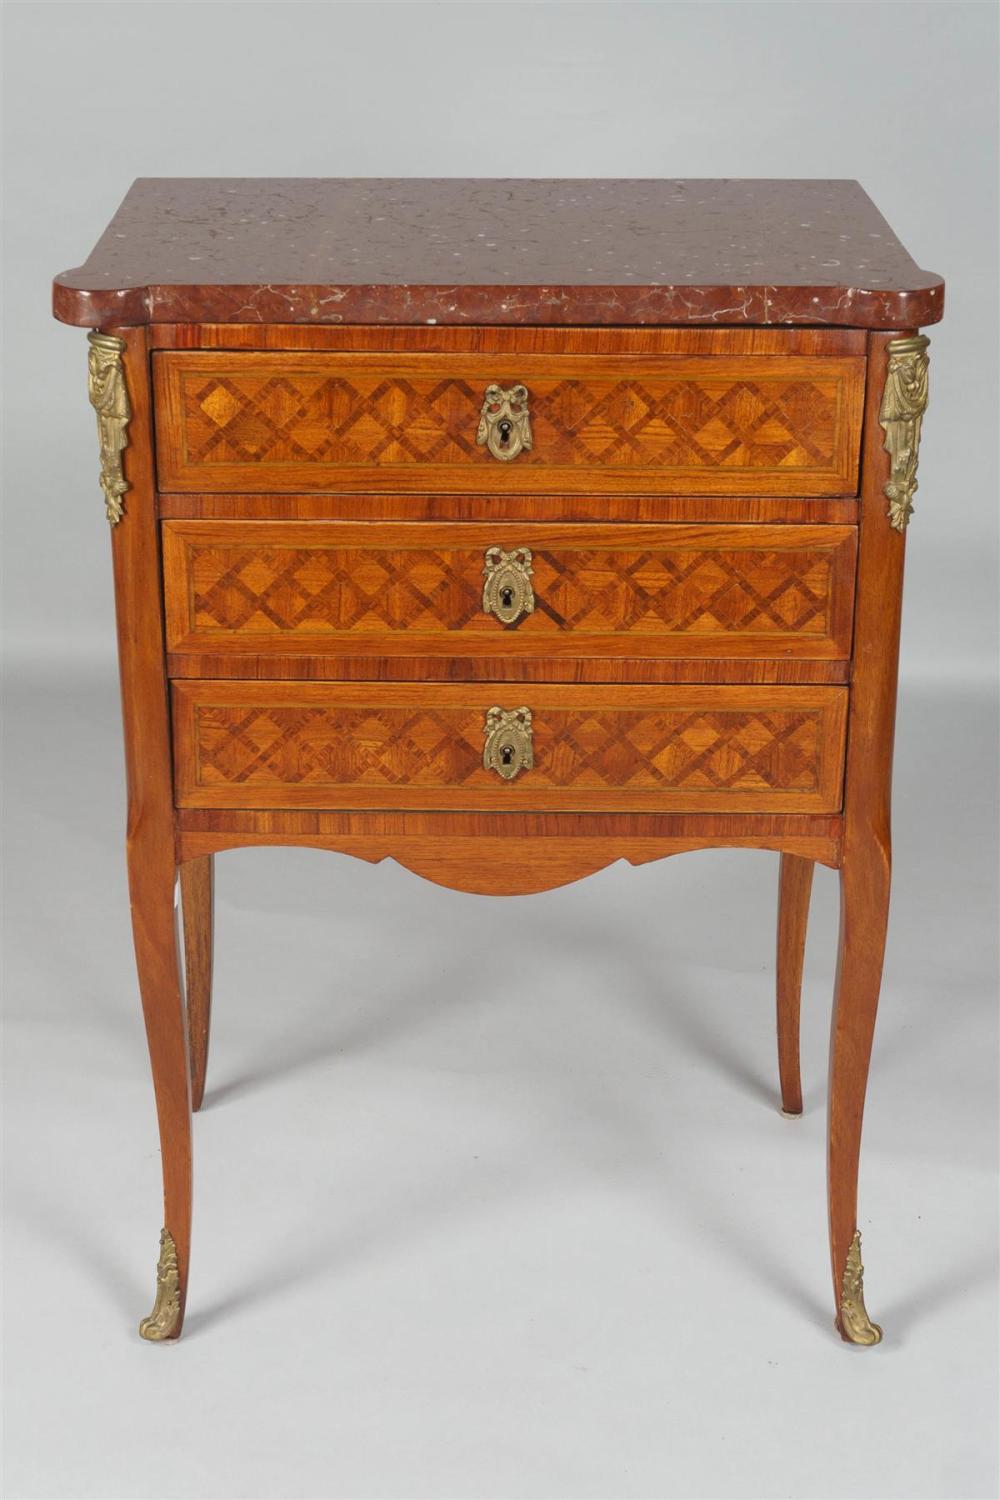 LOUIS XV STYLE AMARANTH AND PARQUETRY